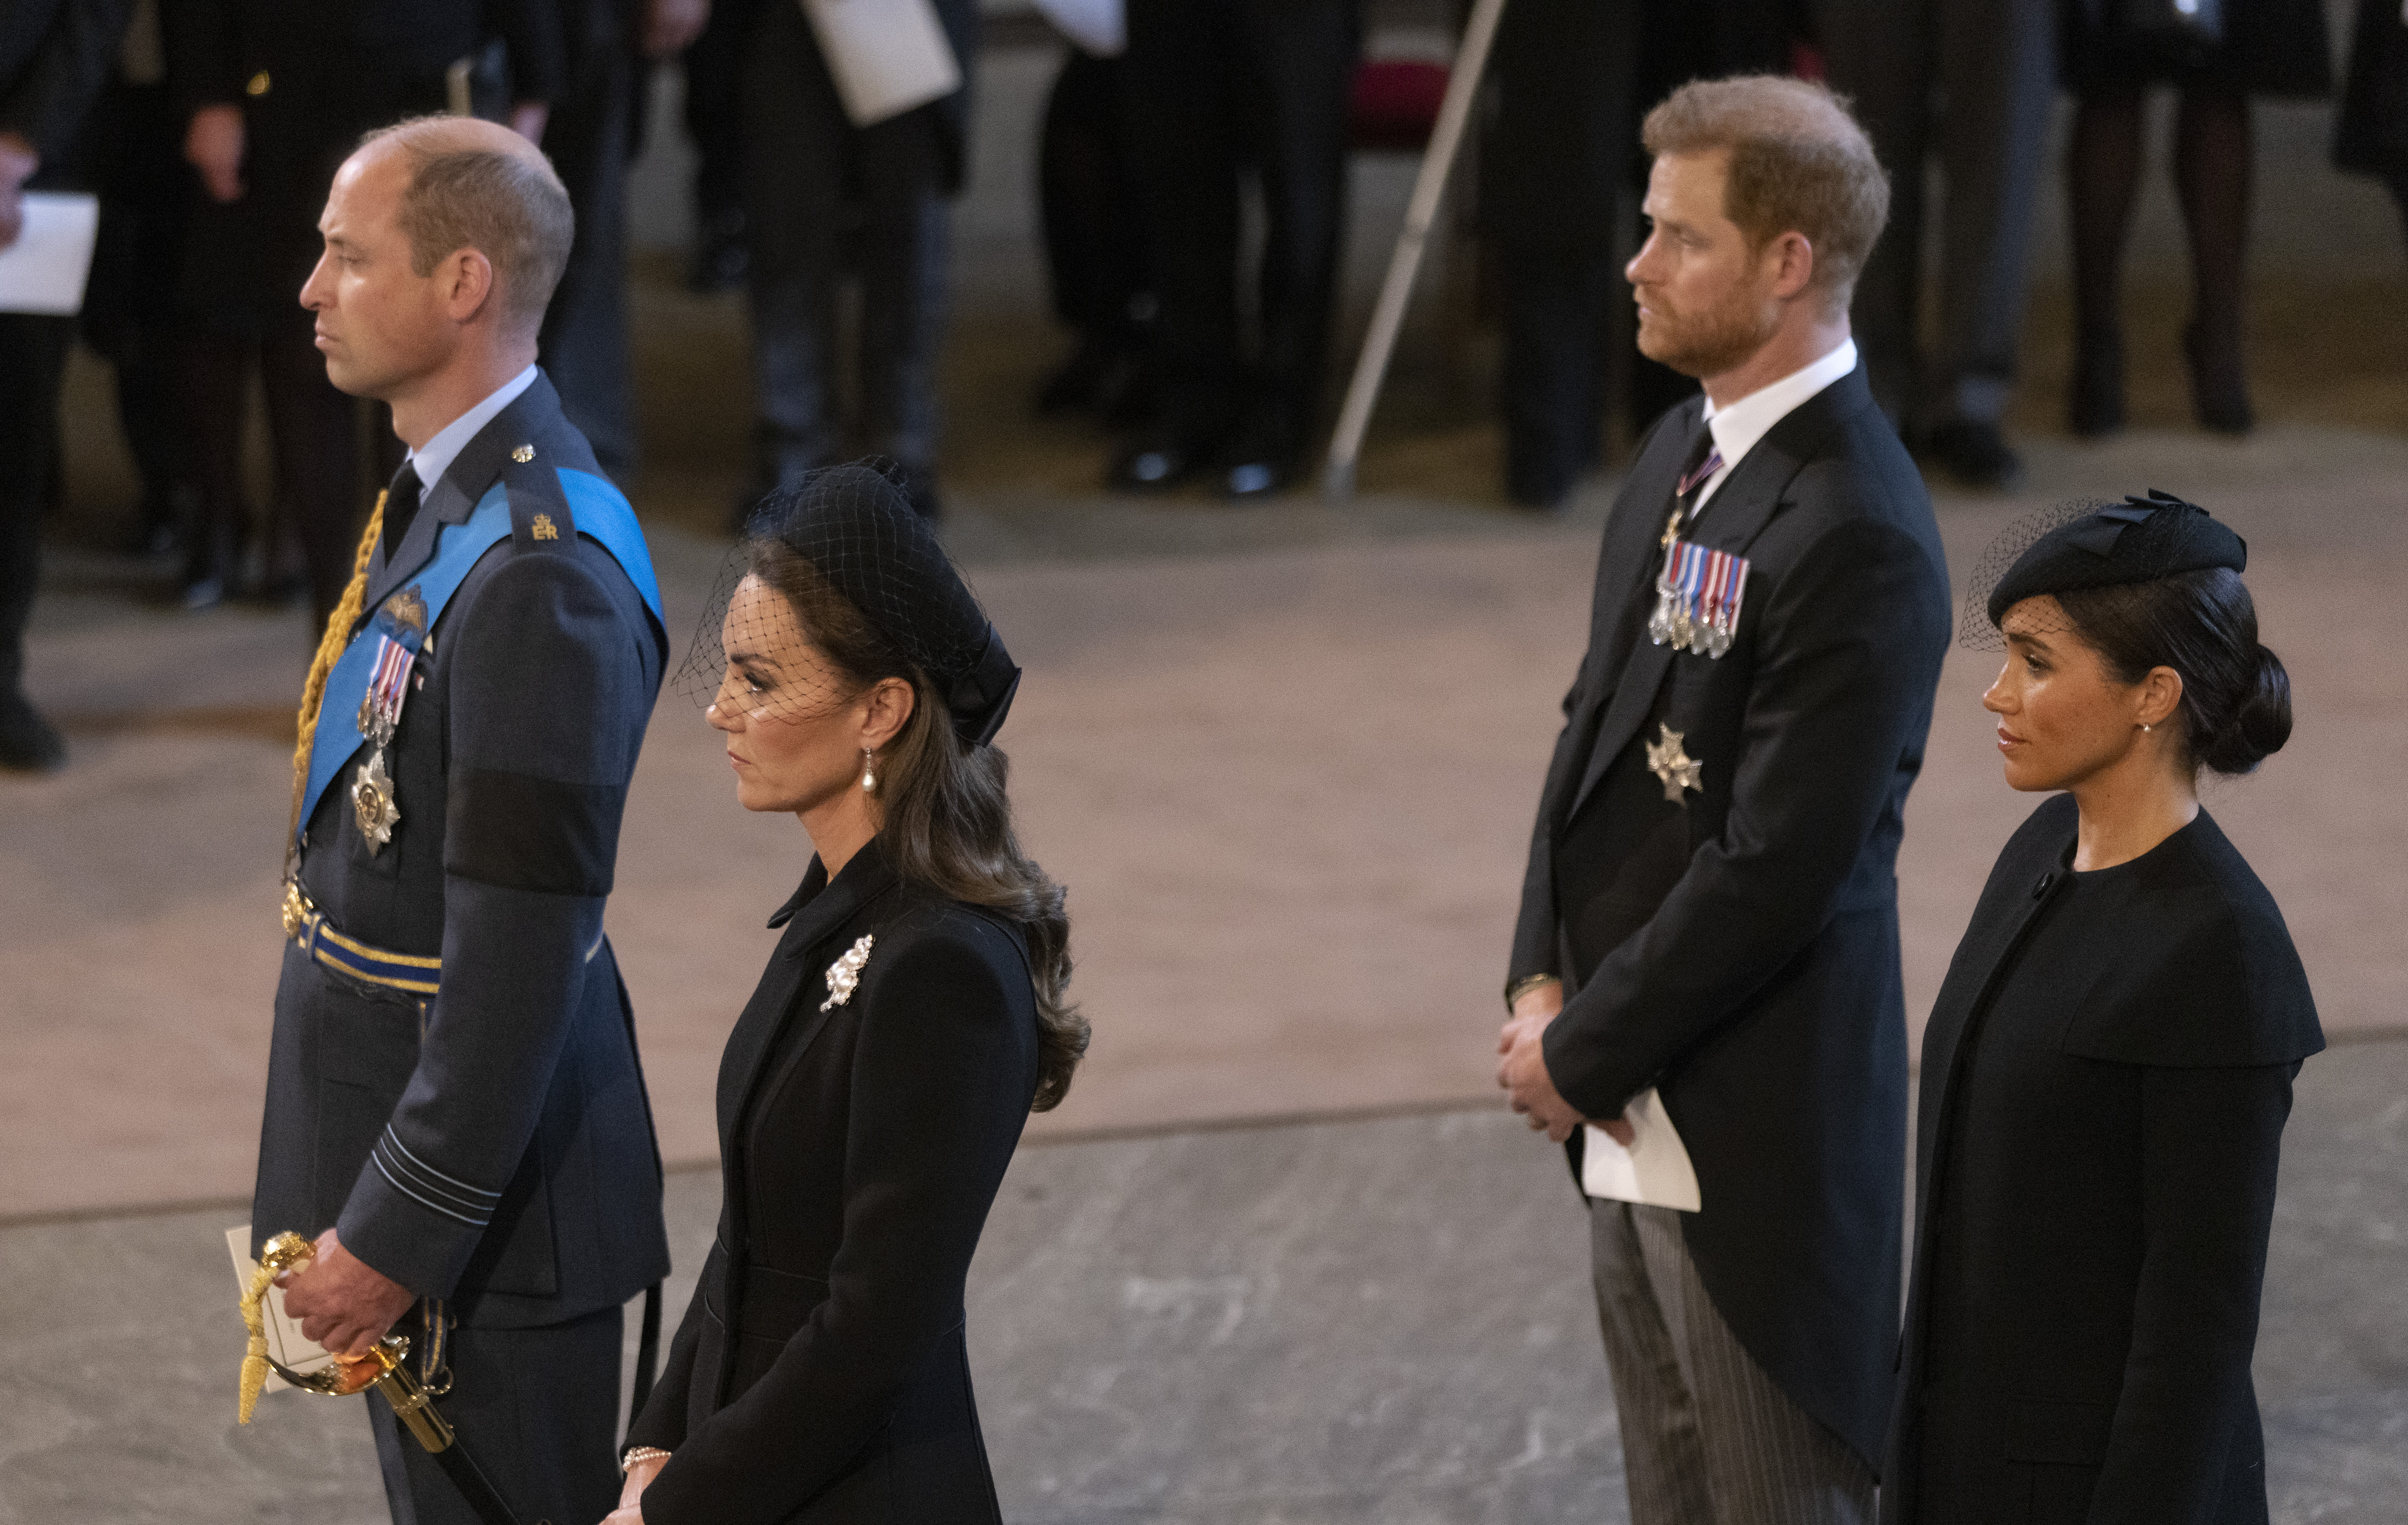 Prince William, Princess of Wales, Prince Harry, and Duchess Meghan arrive as Queen Elizabeth II's body completes its journey from Buckingham Palace to Westminster Hall on September 14, 2022, in London, England | Source: Getty Images